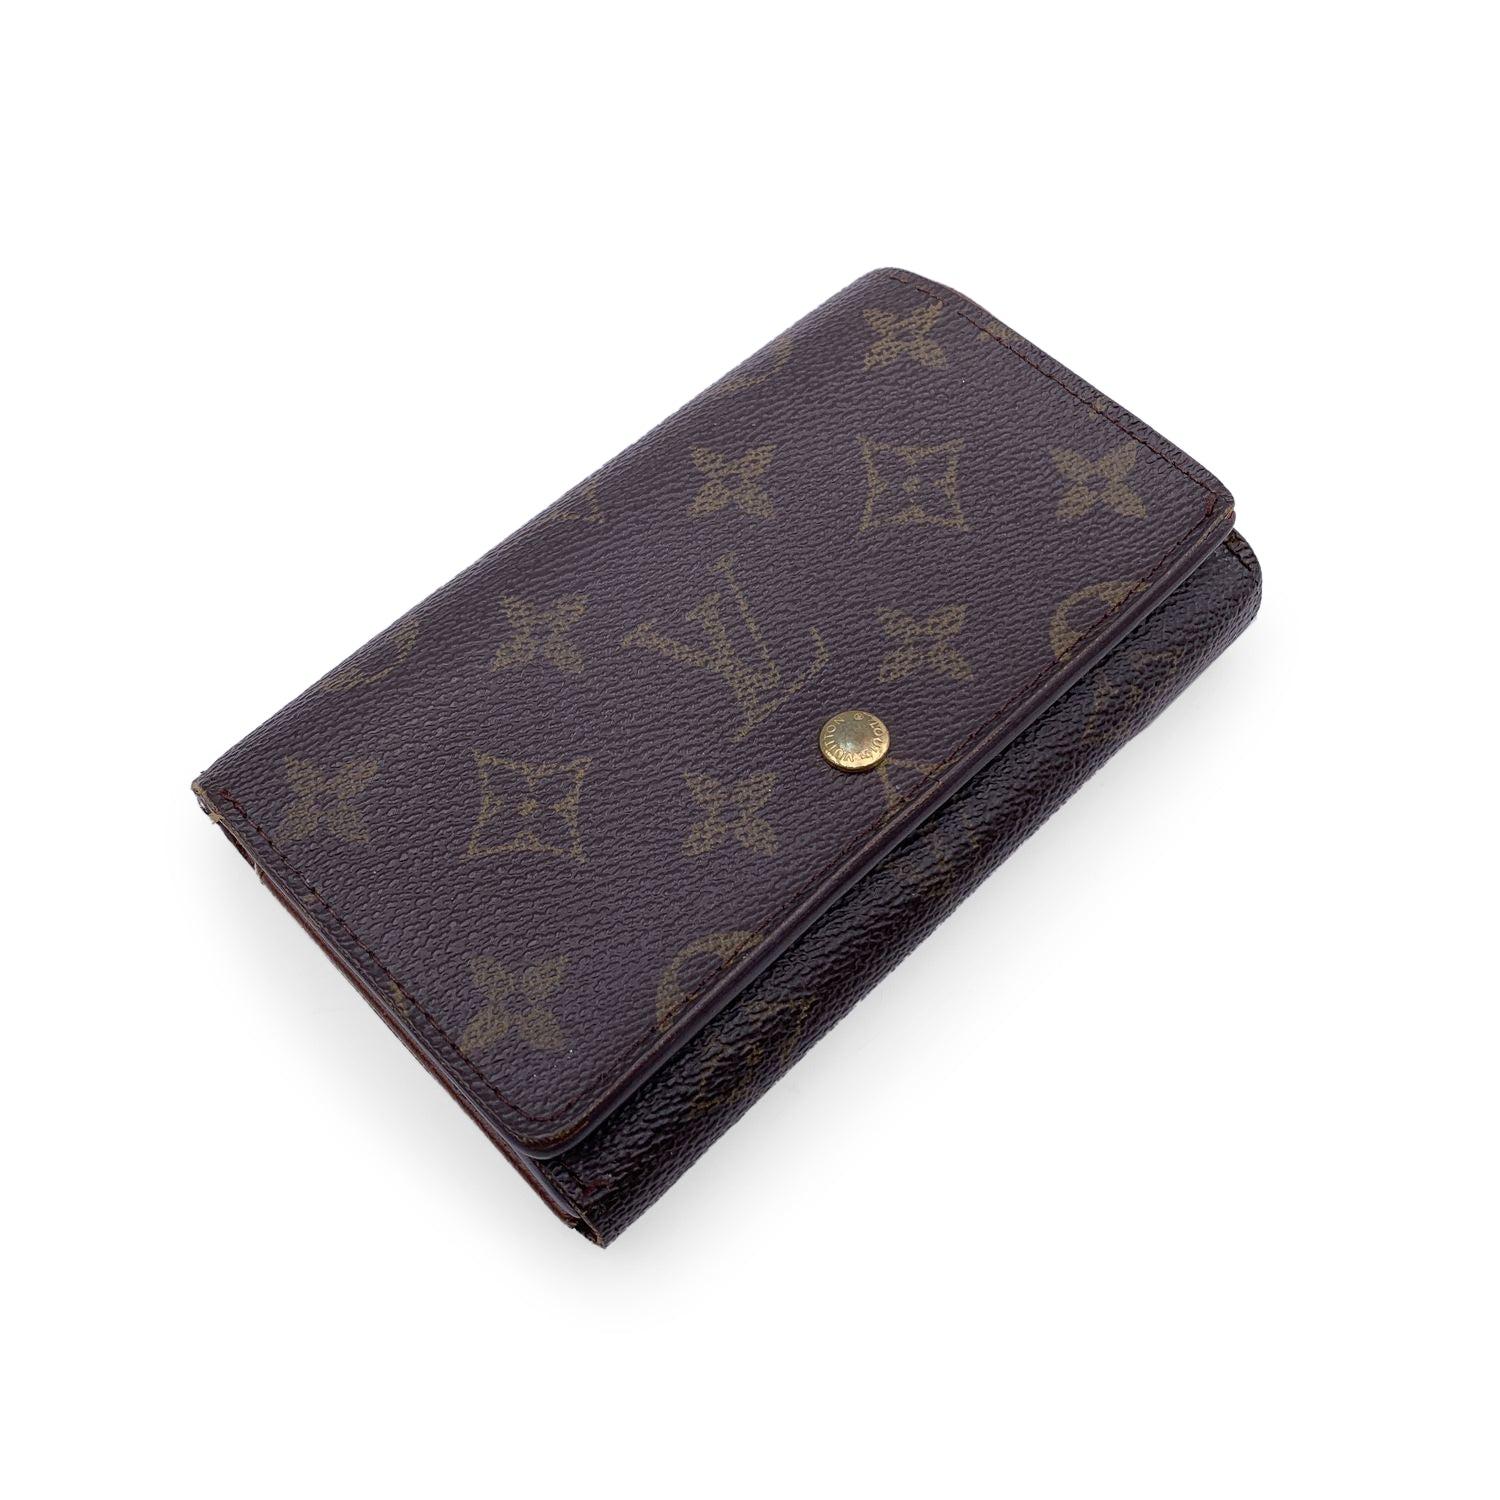 Louis Vuitton wallet, mod. Tresor. Monogram canvas. Cross grain leather lining. Flap and press stud closure. 4 open pockets, 1 middle zipped coin compartment. and 2 credit card slots. 'Louis Vuitton Paris - Made in France' engraved inside.